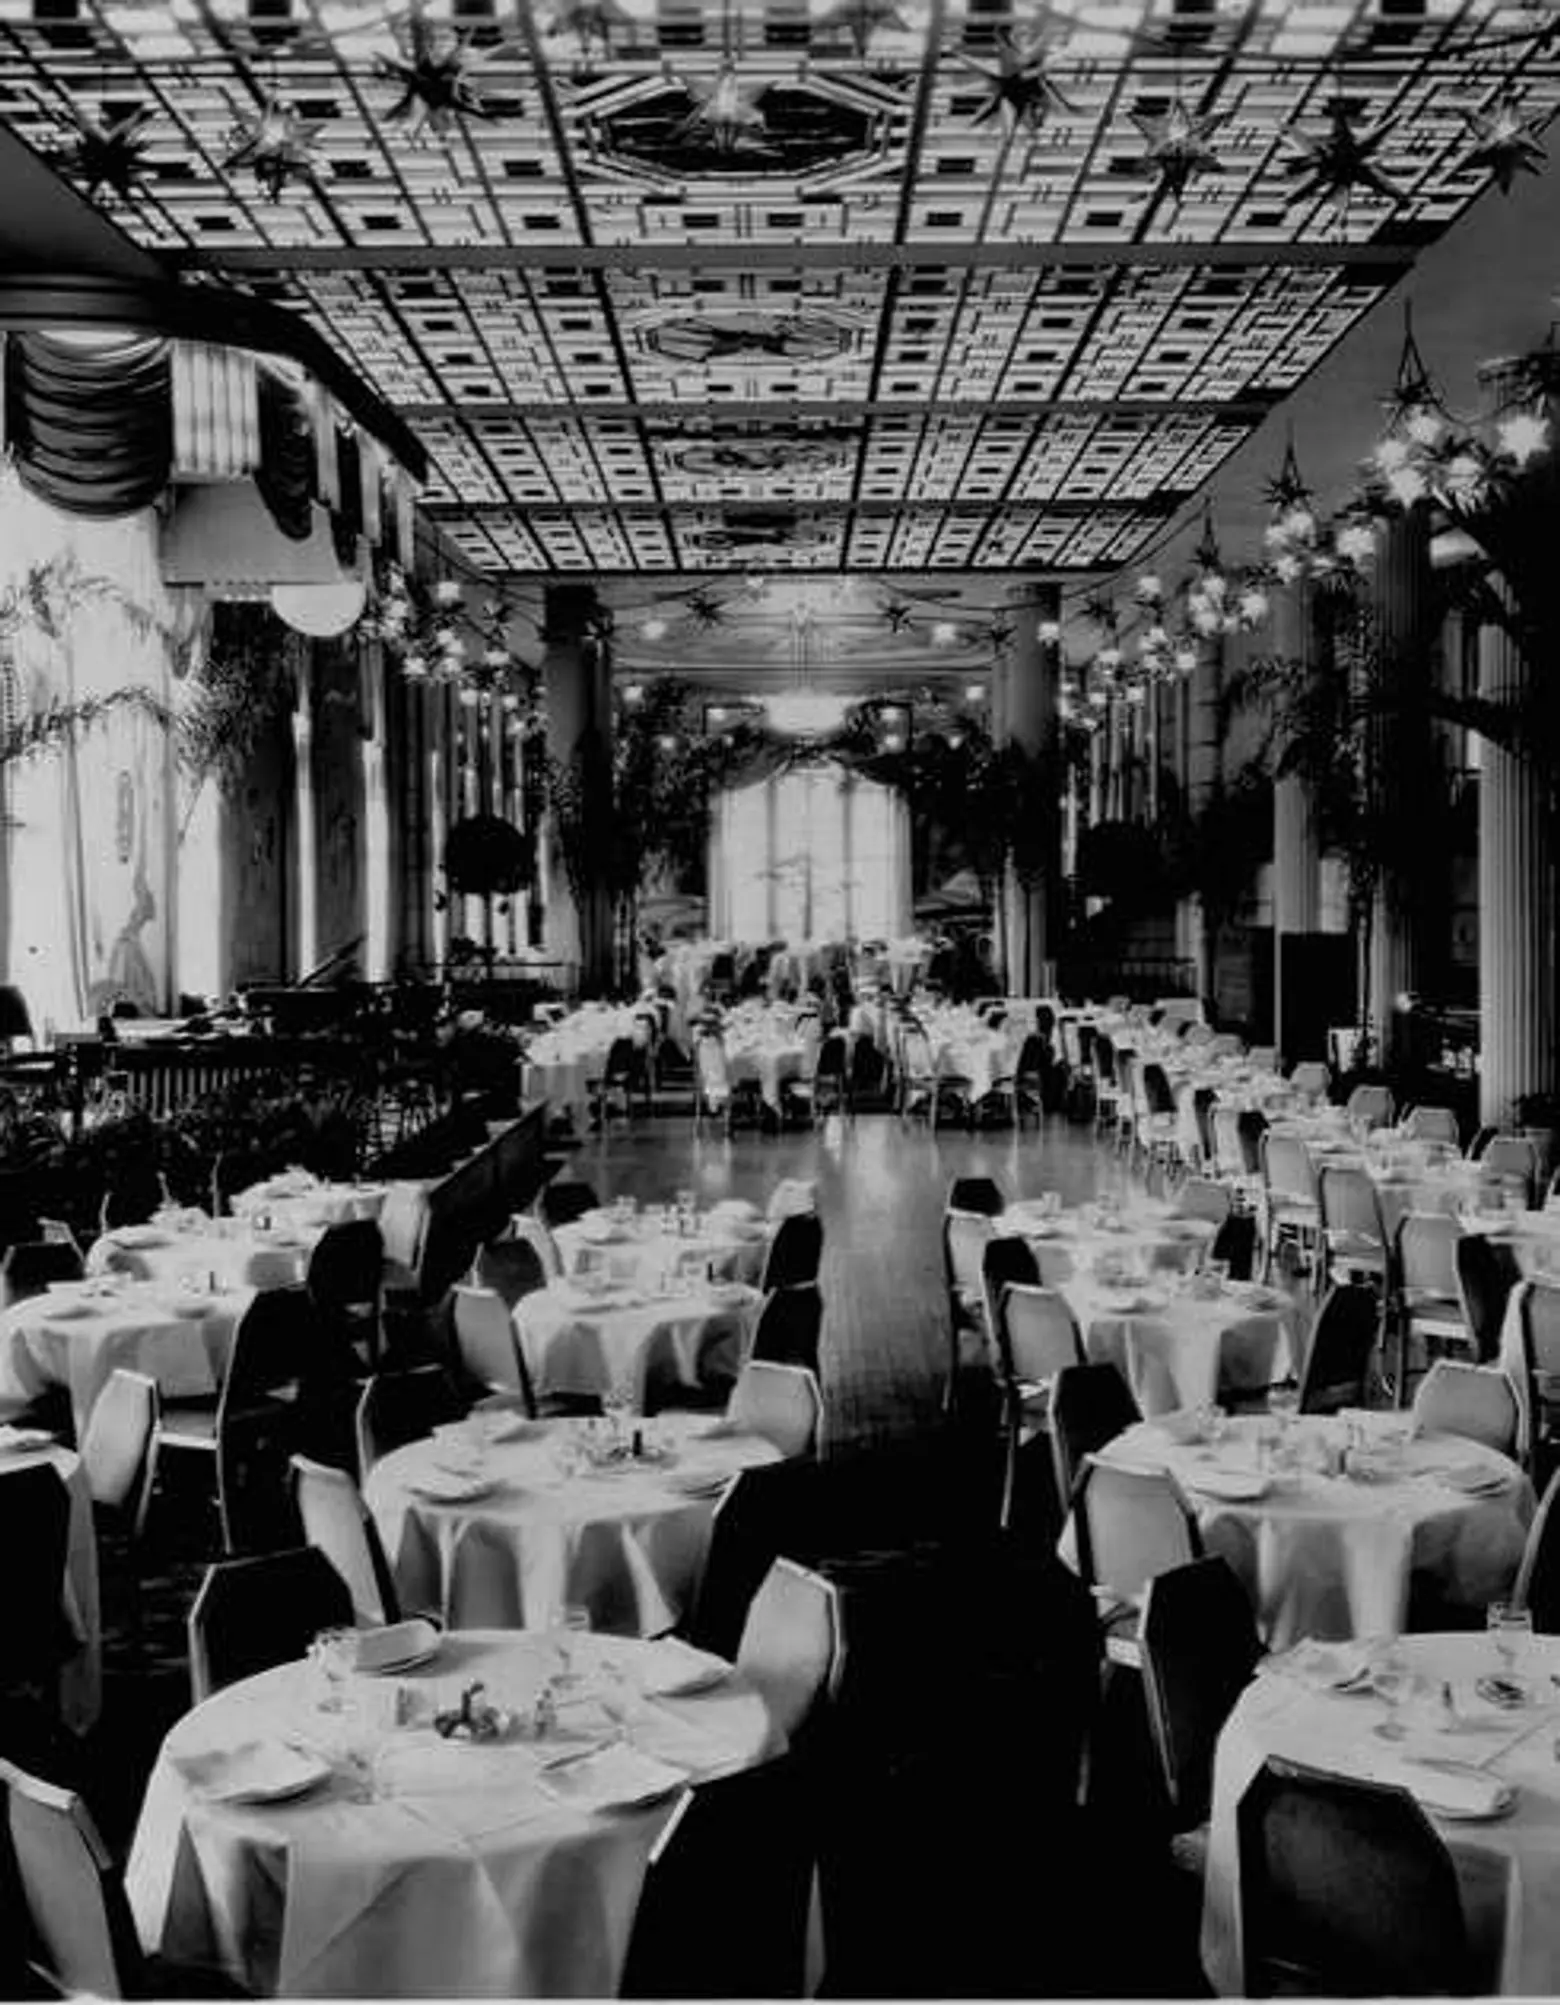 The Starlight Roof,, an ornately decorated ceiling, graces the dining room of the Waldorf-Astoria Hotel. January 4, 1935, New York City. (Photo by Library of Congress/Corbis/VCG via Getty Images)